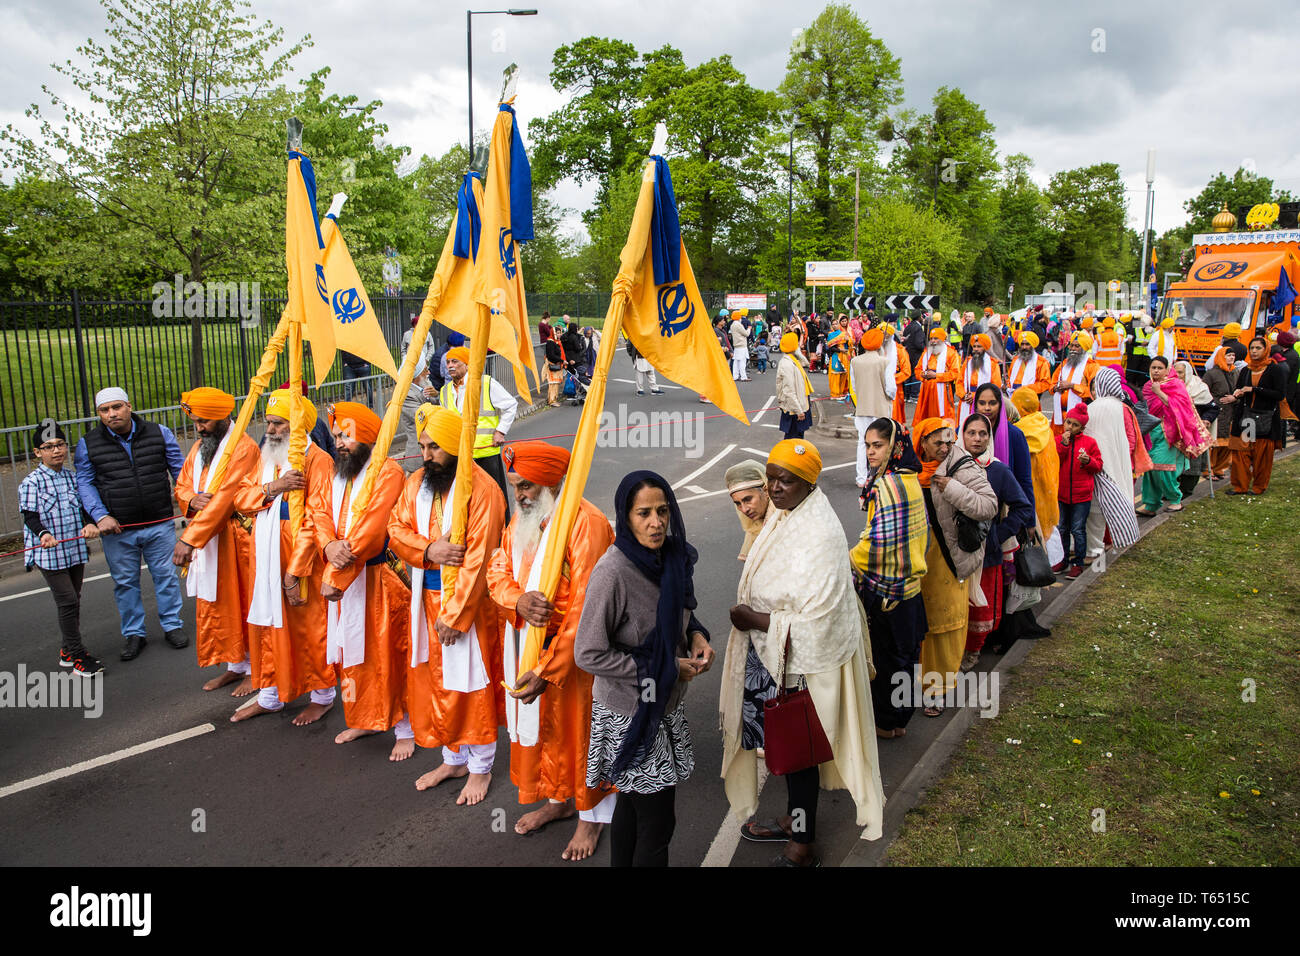 Slough, UK. 28th April 2019. The bearers of the Nishan Sahib, followed by the Pani Pyare (Five Beloved Ones), take part in the Vaisakhi Nagar Kirtan p Stock Photo